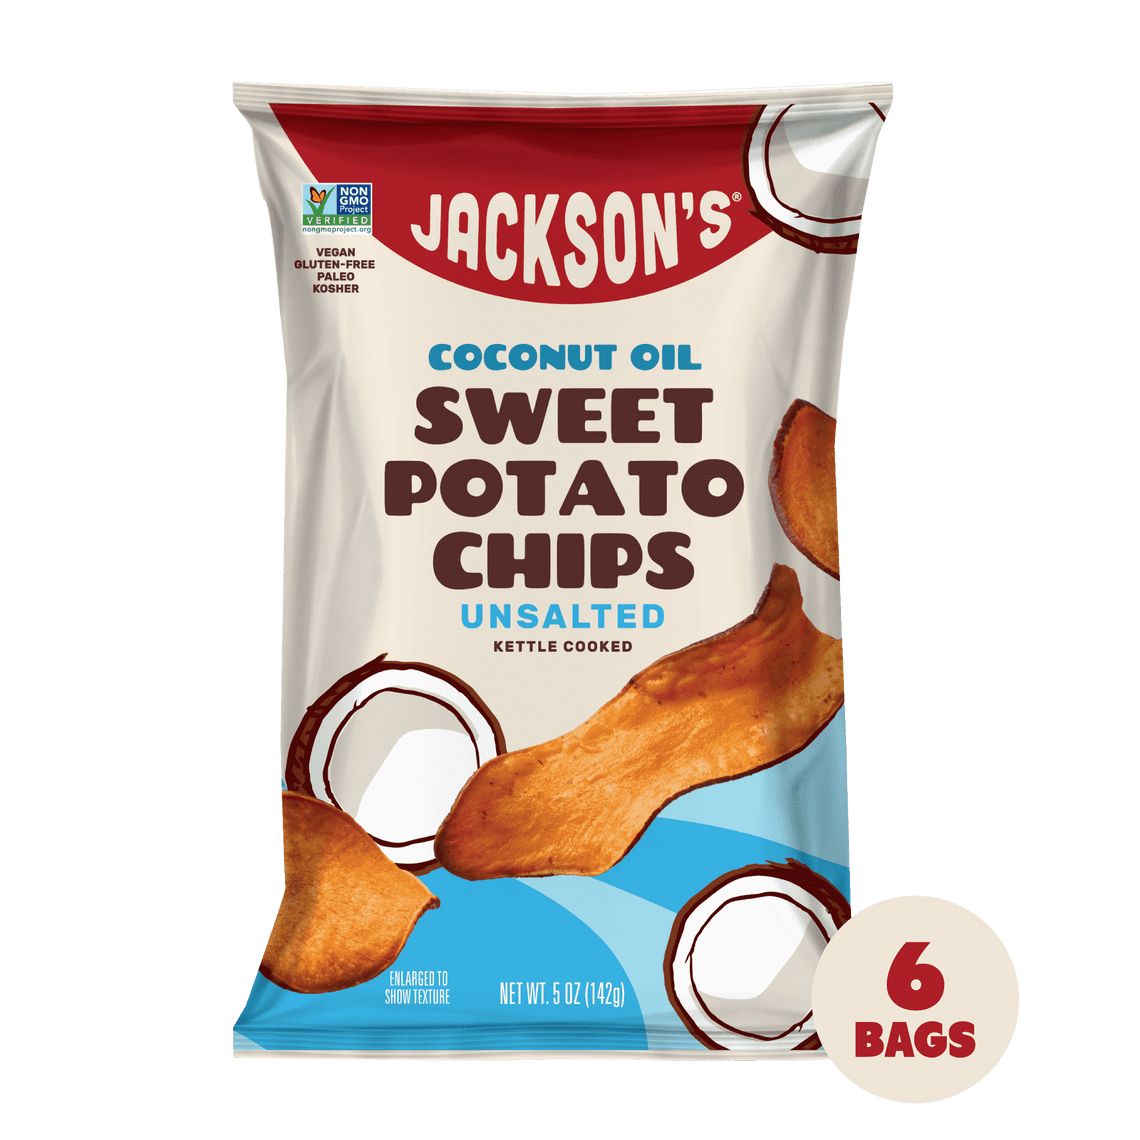 Jackson's Honest Unsalted Sweet Potato Chips with Coconut Oil 1.5oz- 12 bags. Not cooked in seed oil.